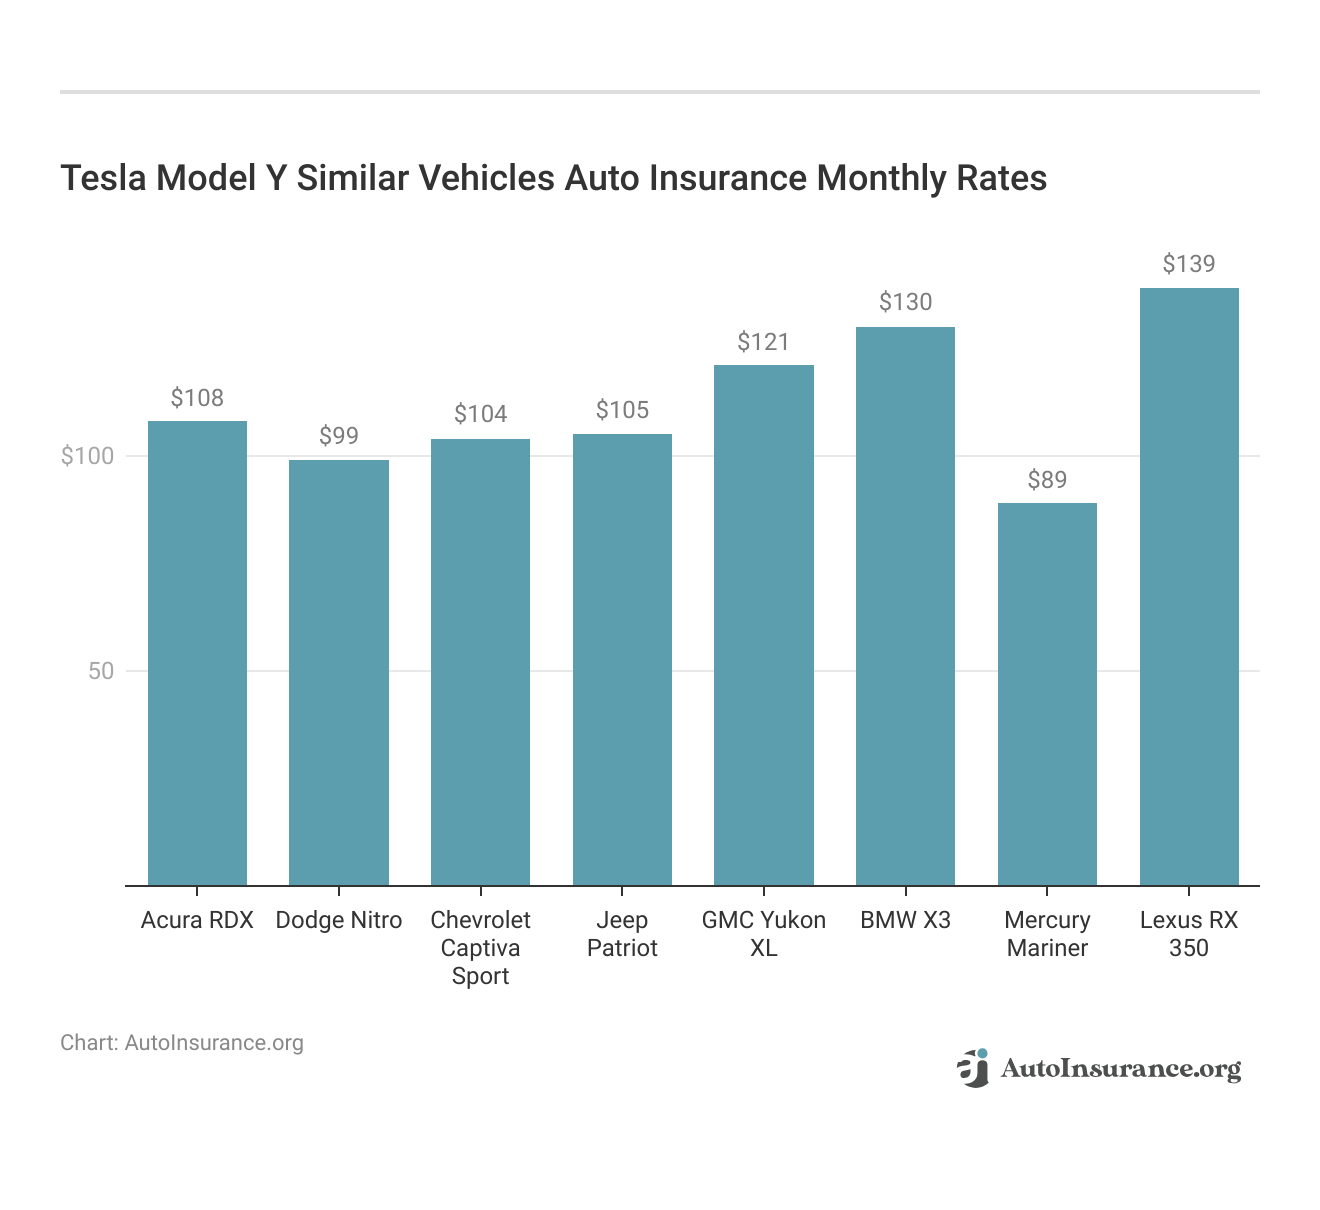 <h3>Tesla Model Y Similar Vehicles Auto Insurance Monthly Rates</h3>